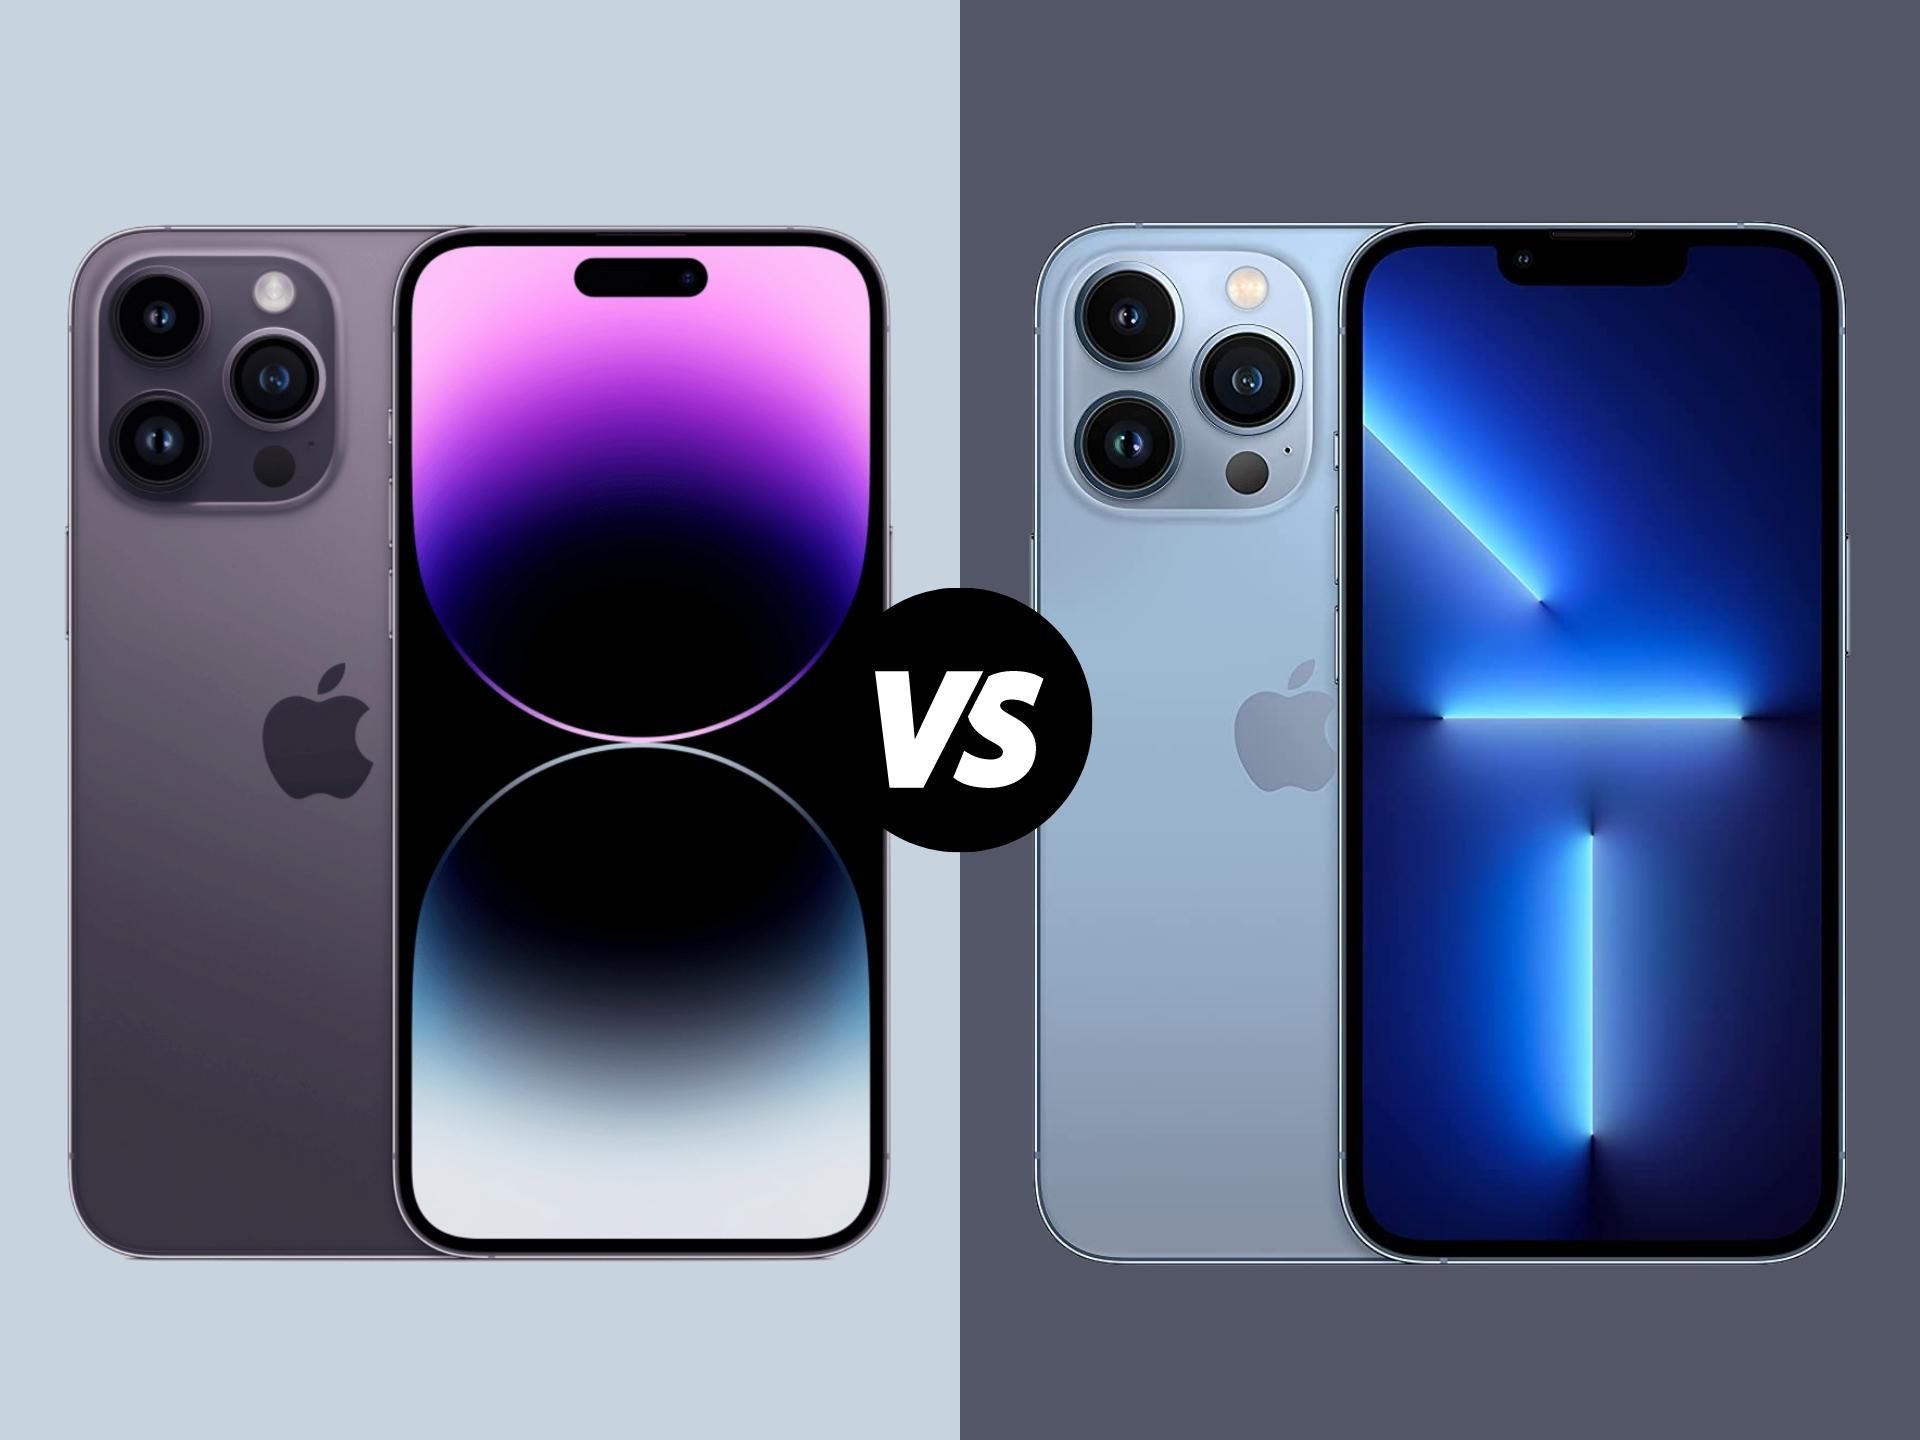 iPhone 14 Pro series vs iPhone 13 Pro series: What's new and different?